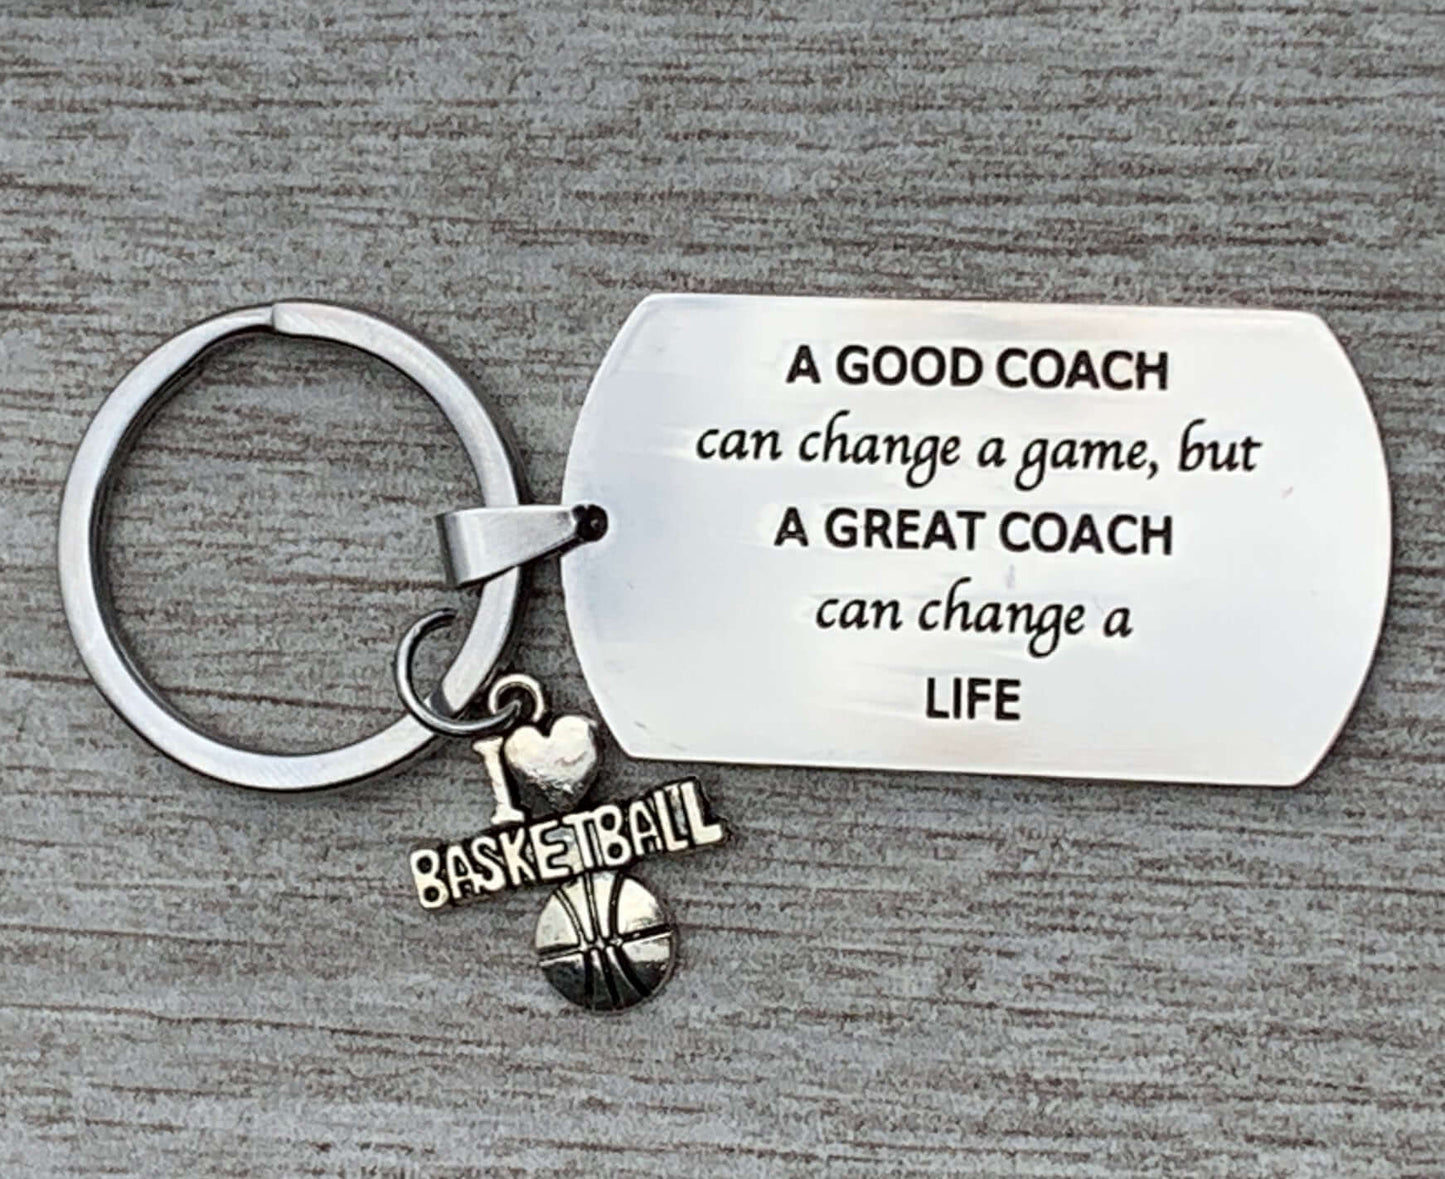 Basketball Coach Keychain - A Great Coach Can Change a Life - Sportybella